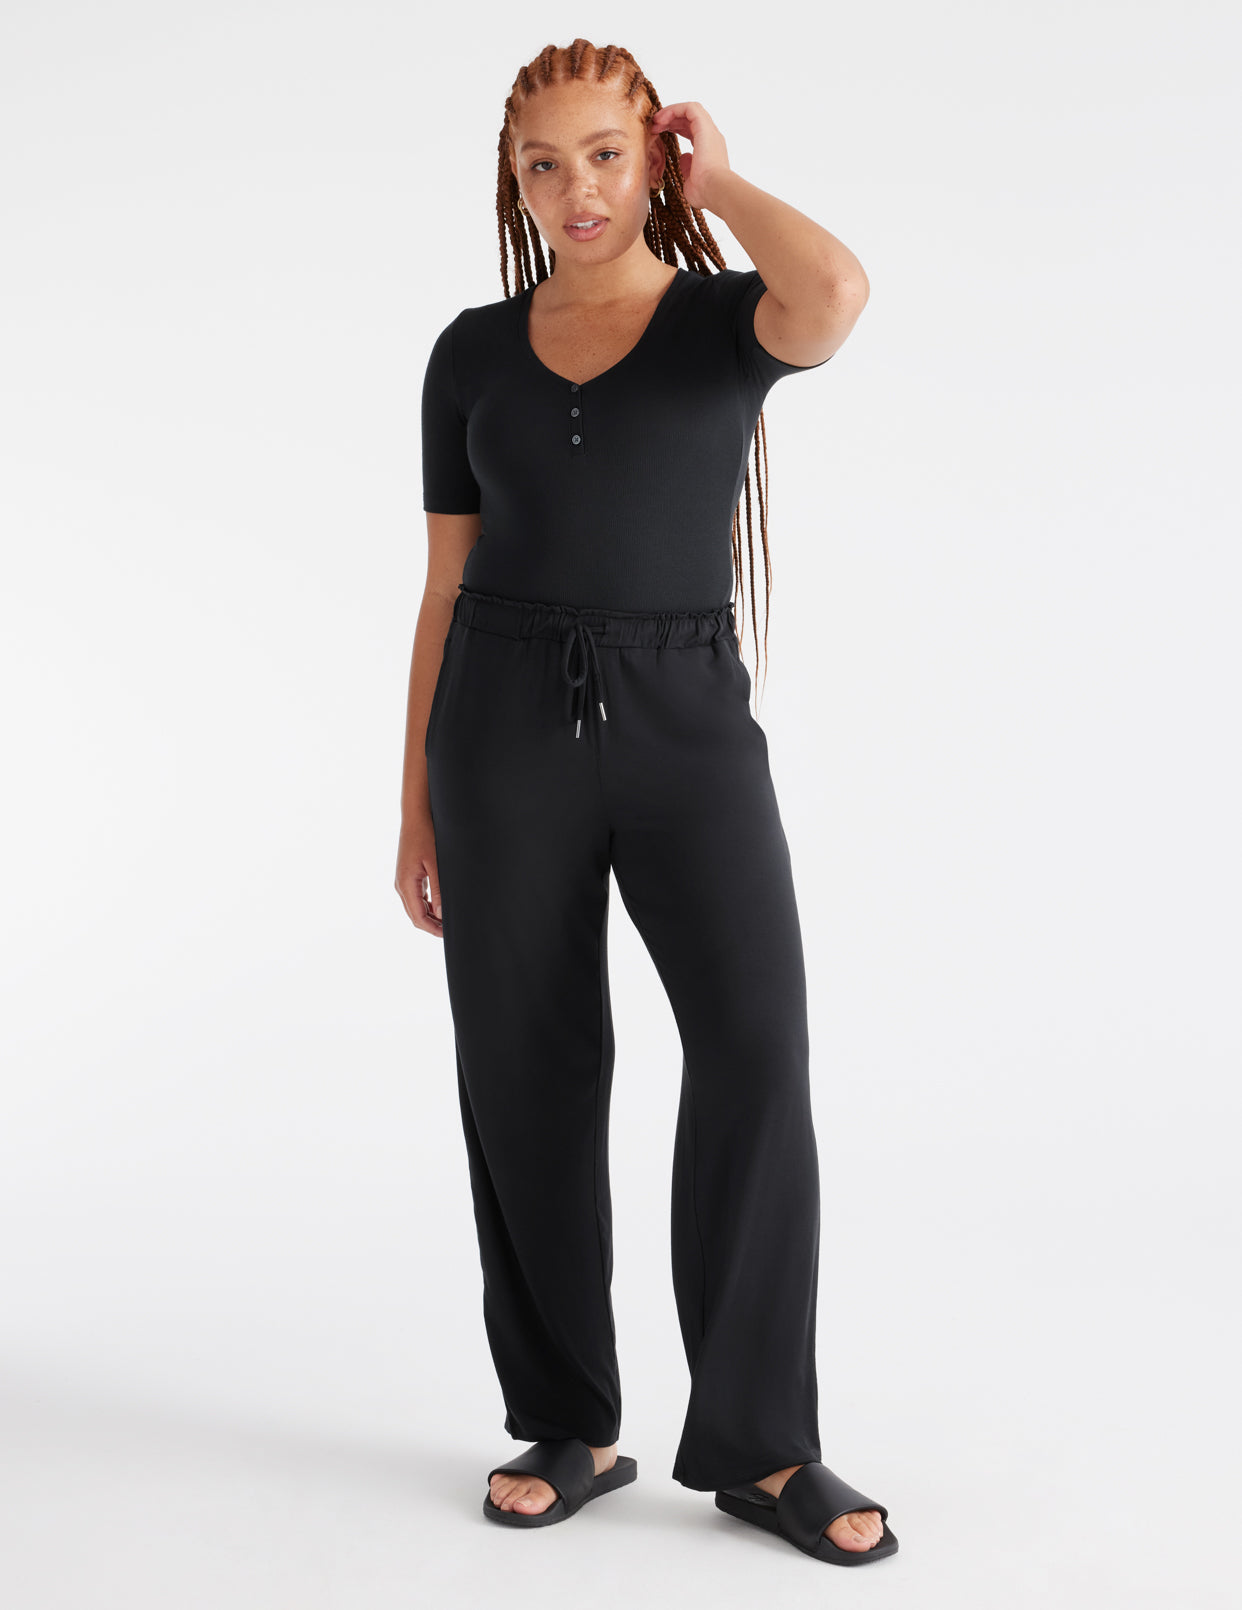 Knix - Intimates & Loungewear: Spend $80 or more, get $25 back, up